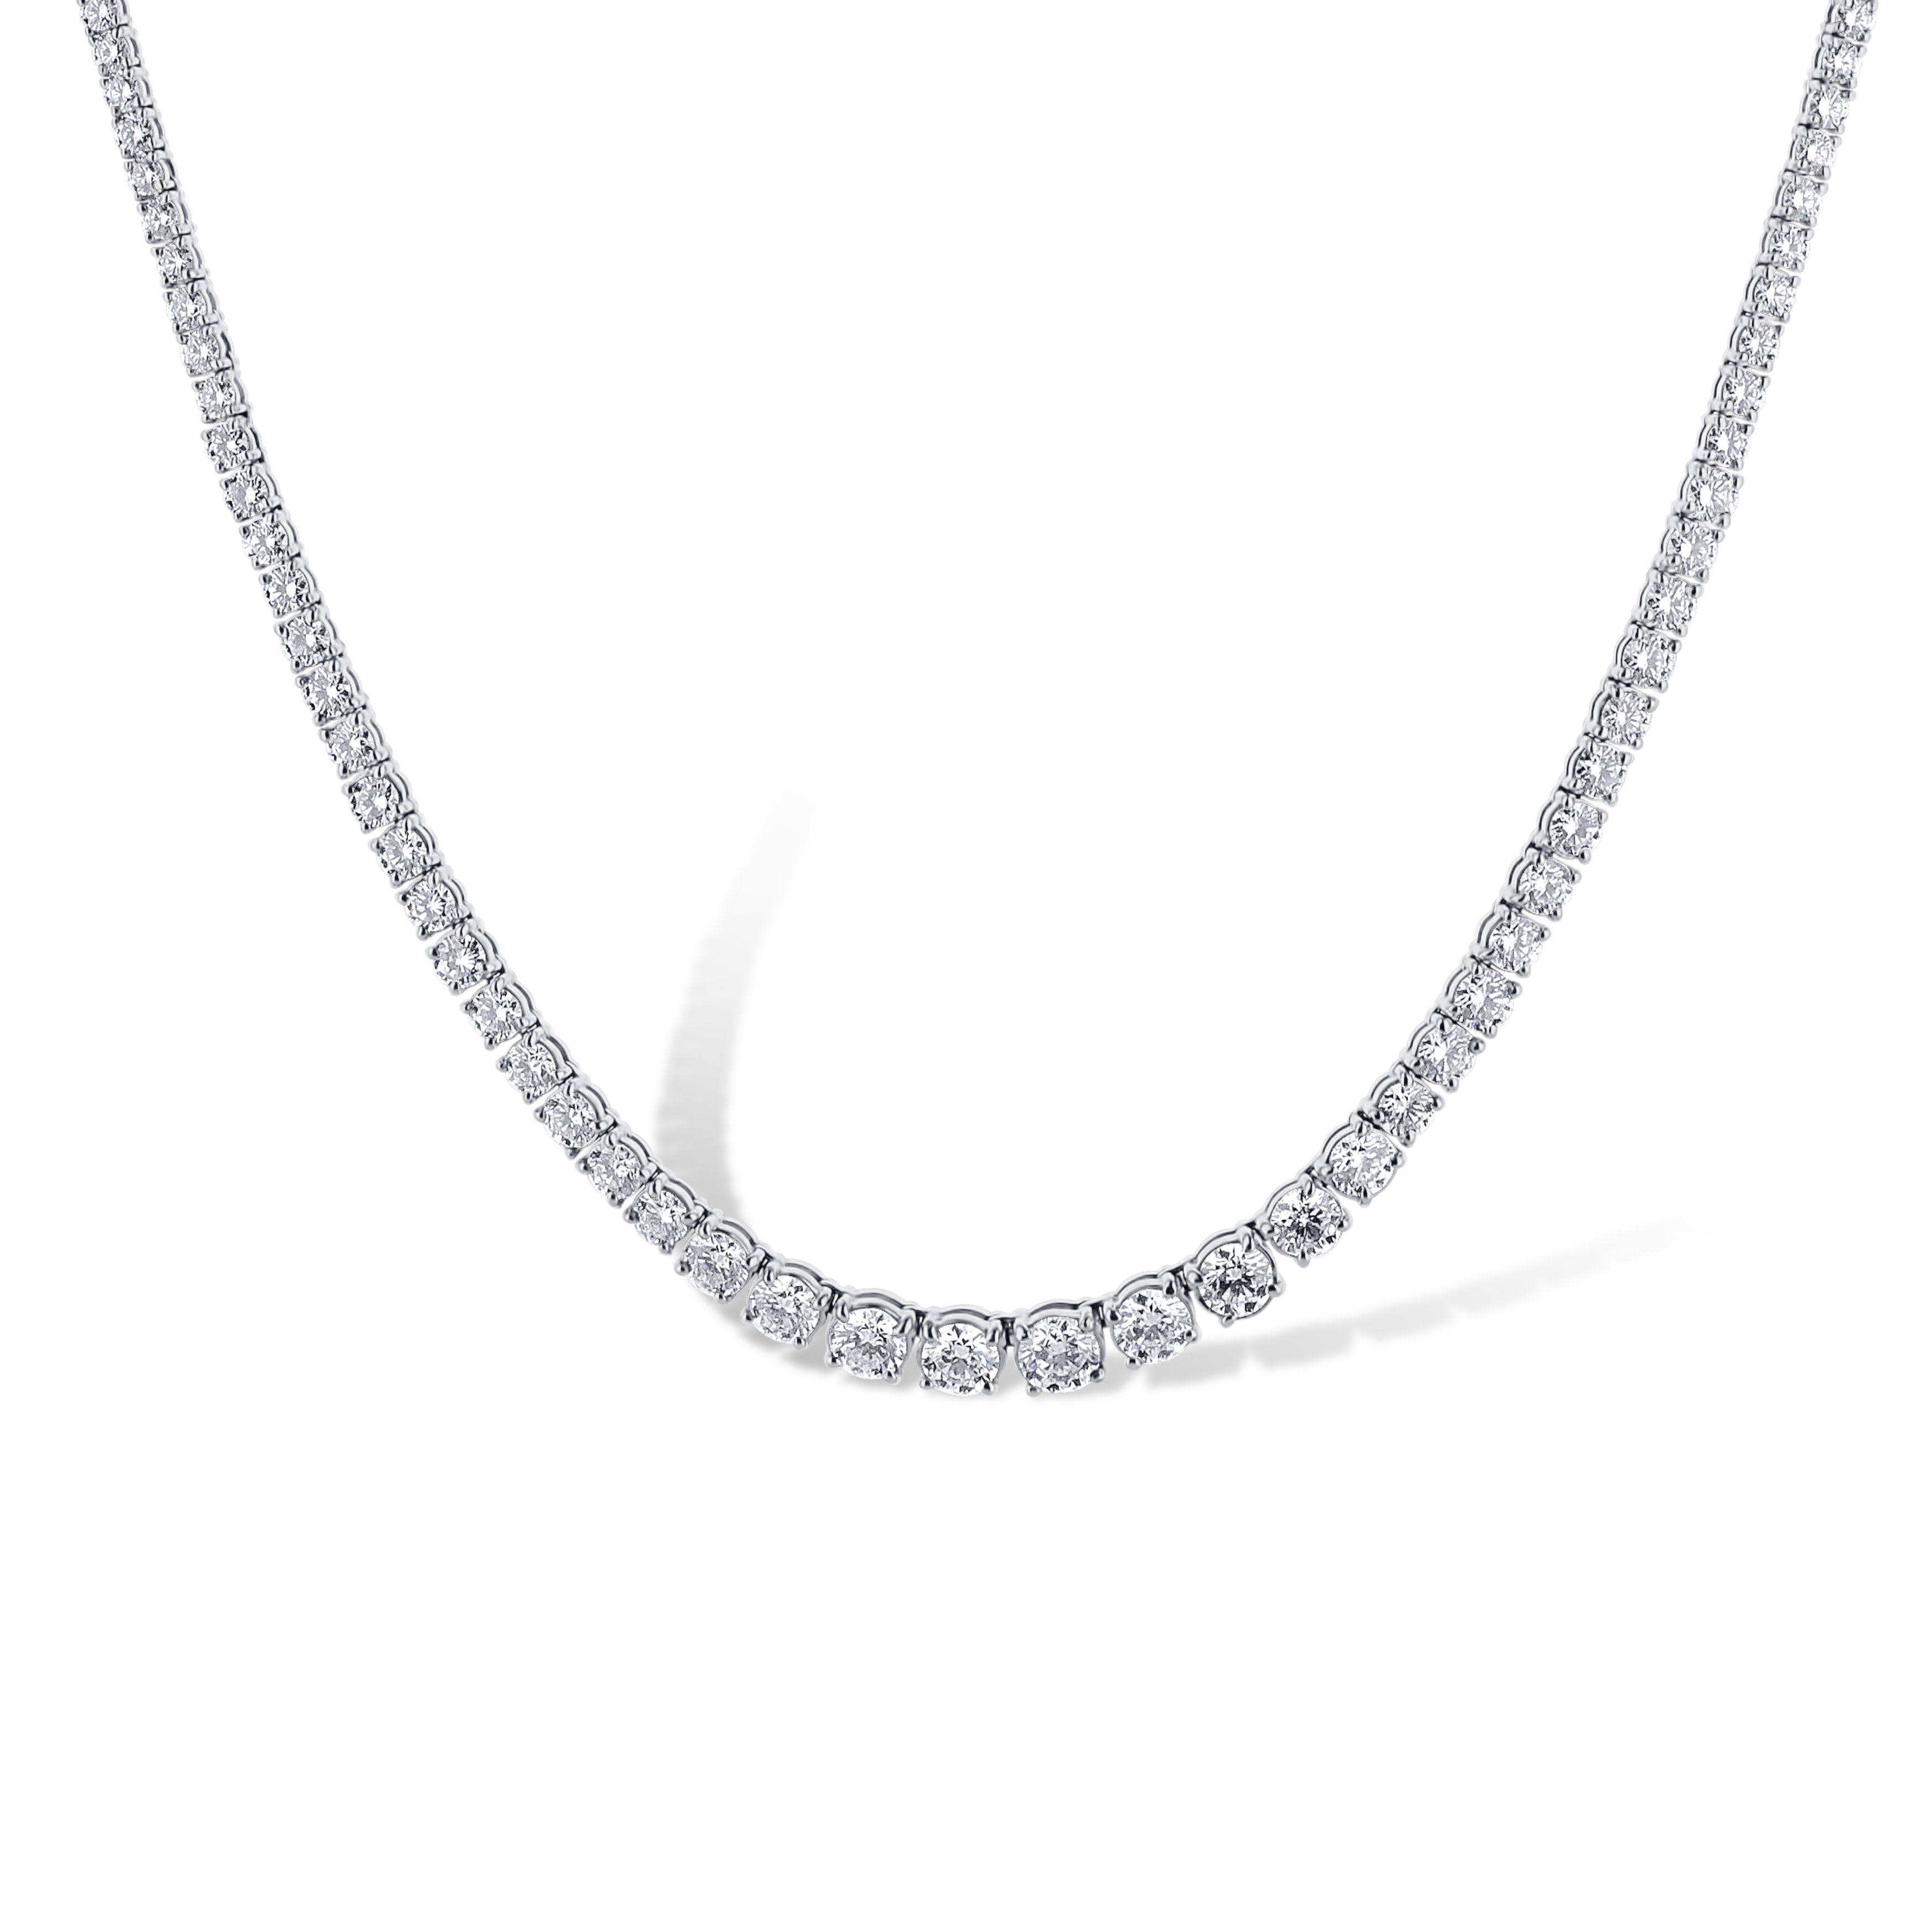 Buy Estate 5.00ct Diamond and Platinum Tennis Line Necklace Online in India  - Etsy